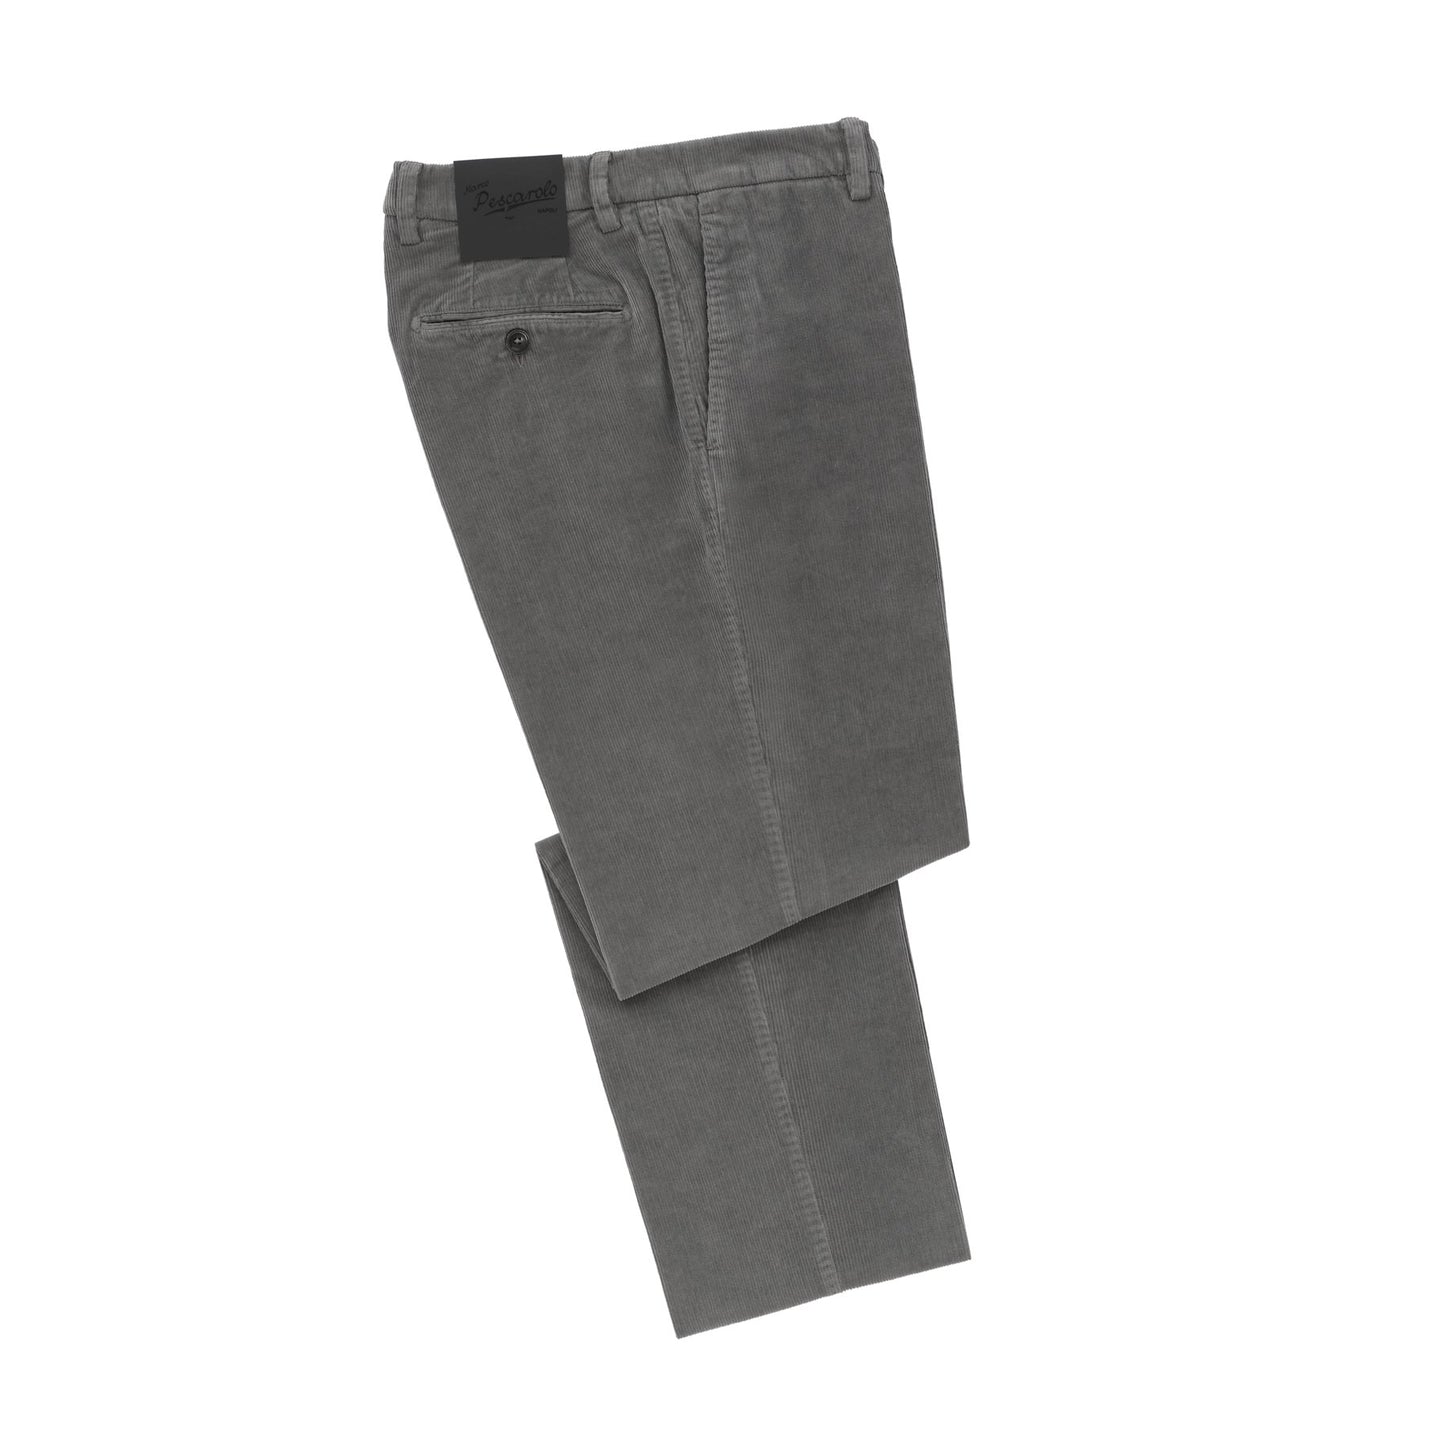 Marco Pescarolo Slim-Fit Velvet Cotton and Cashmere-Blend Trousers in Grey - SARTALE